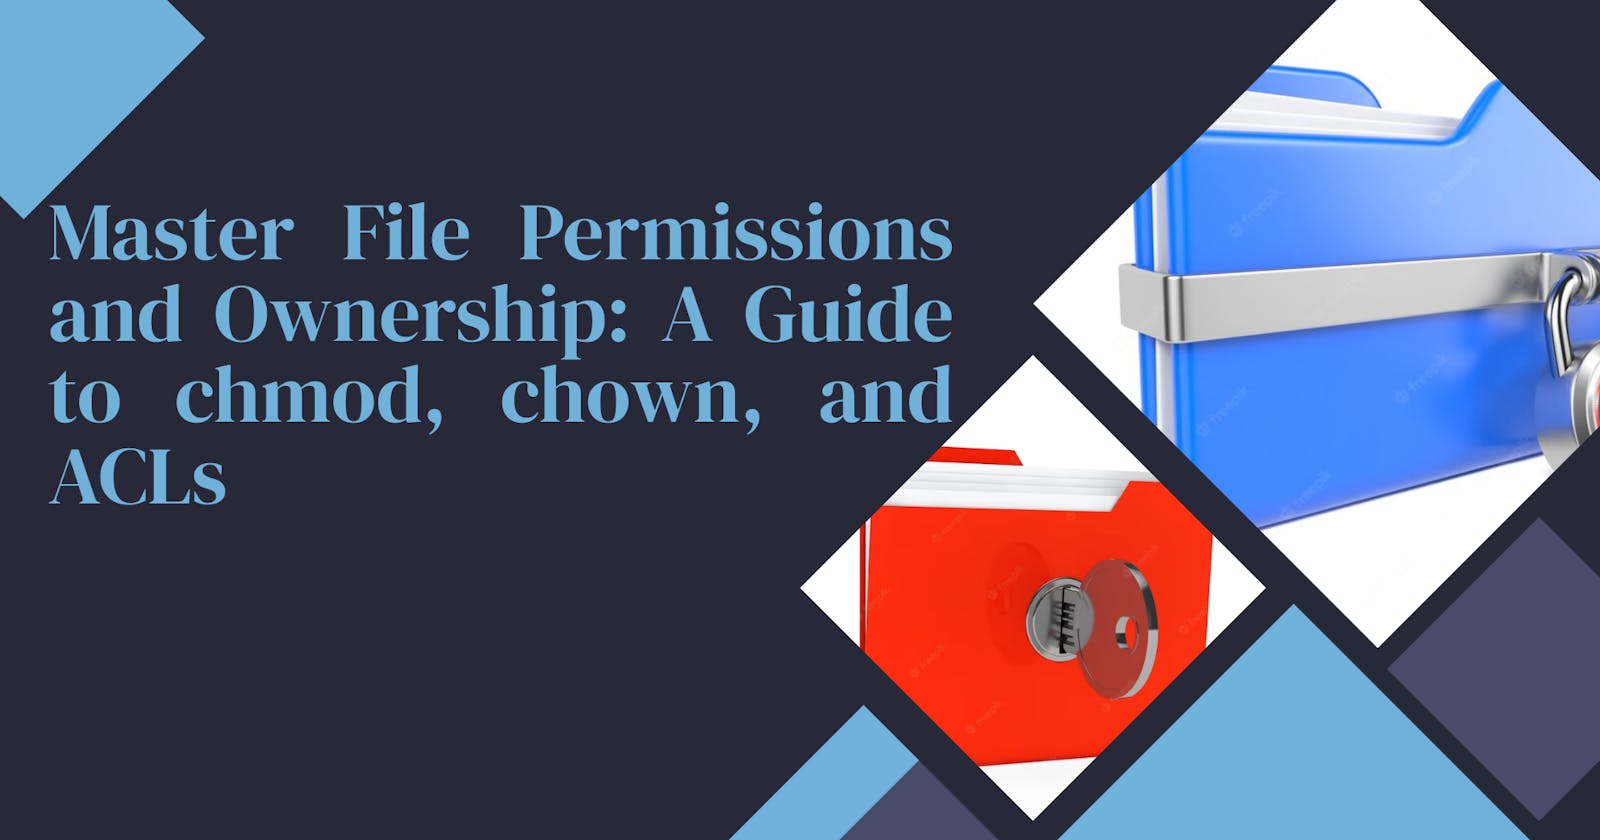 Master File Permissions and Ownership: A Guide to chmod, chown, and ACL Commands